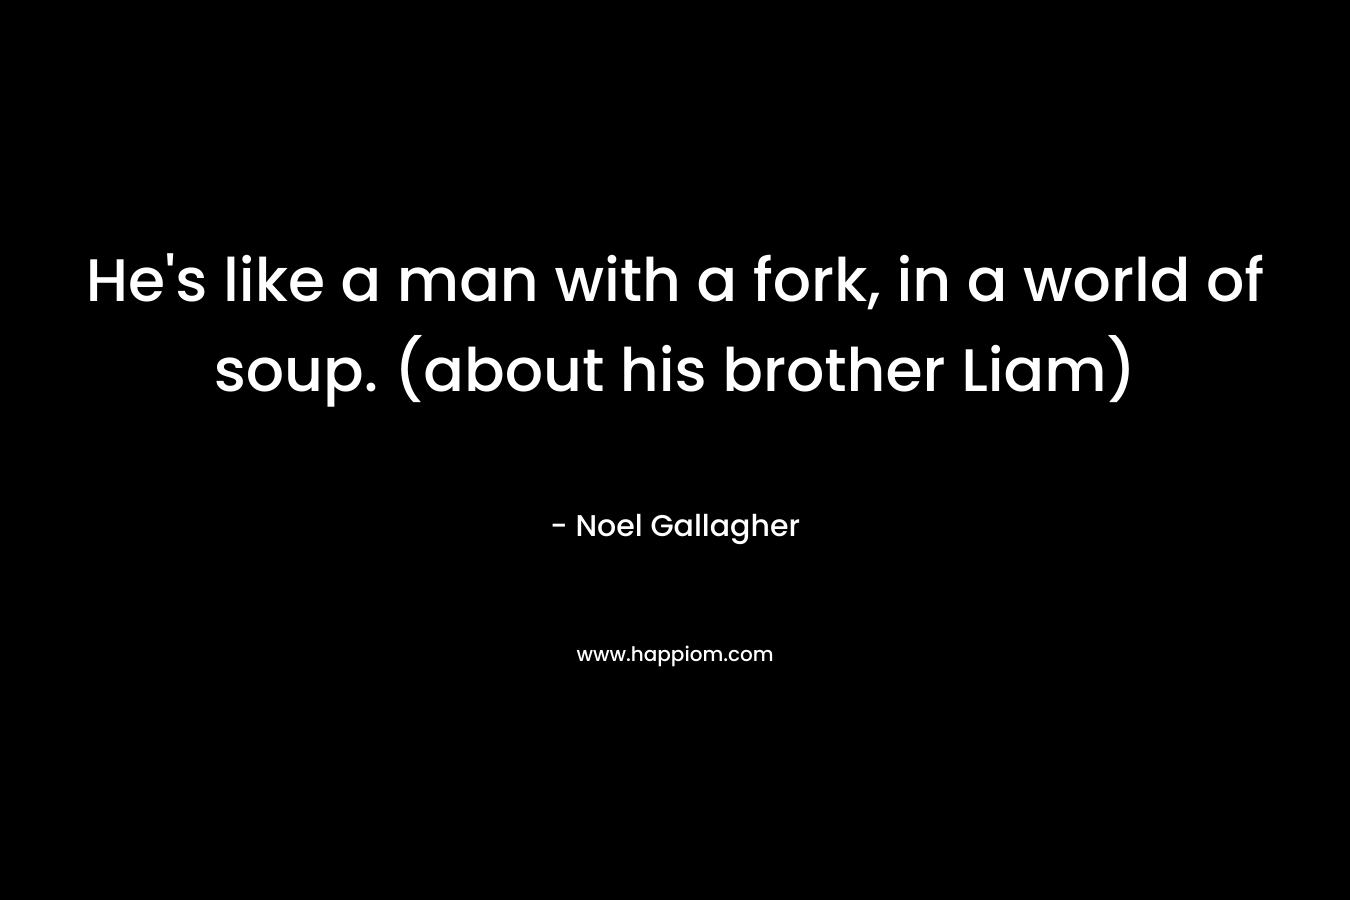 He’s like a man with a fork, in a world of soup. (about his brother Liam) – Noel Gallagher